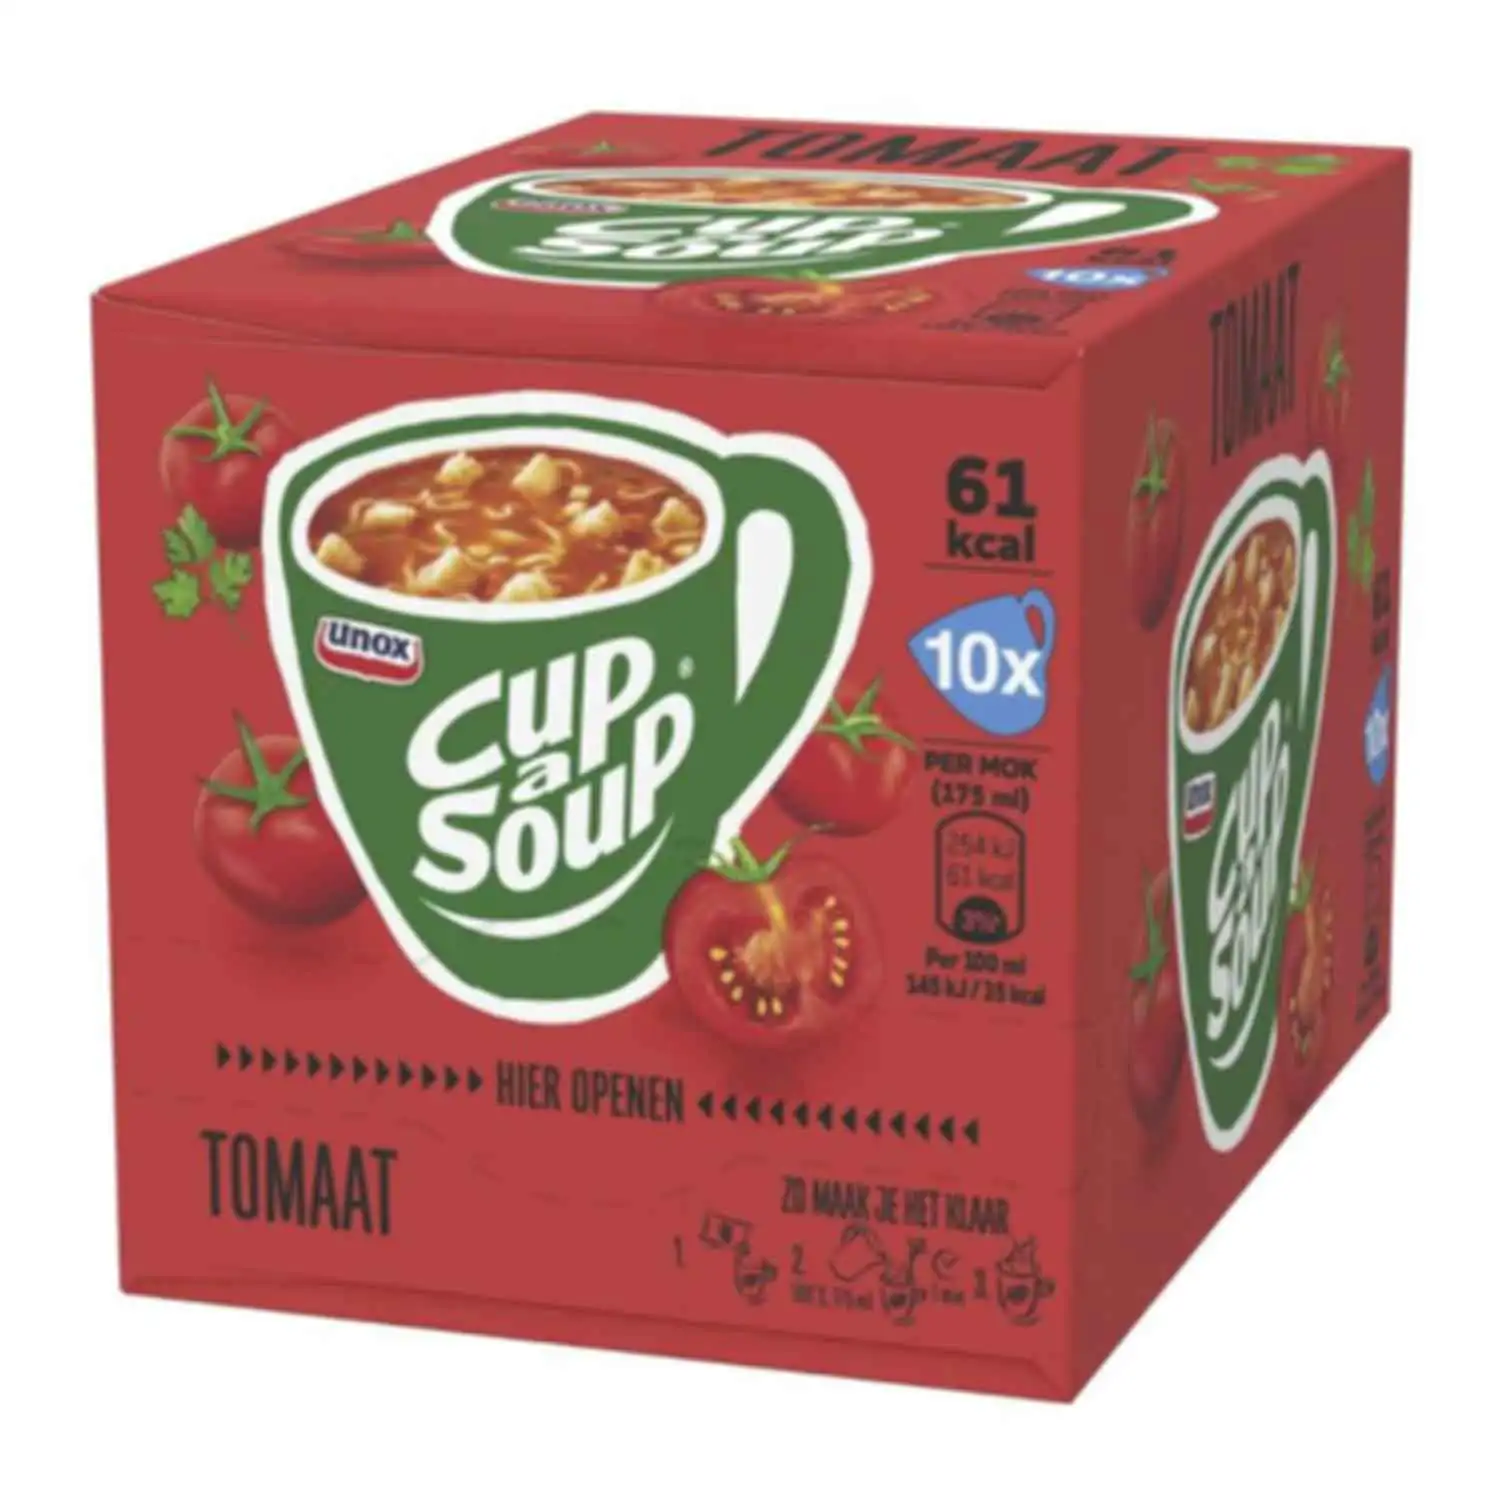 10x Cup a Soup tomato 18g - Buy at Real Tobacco